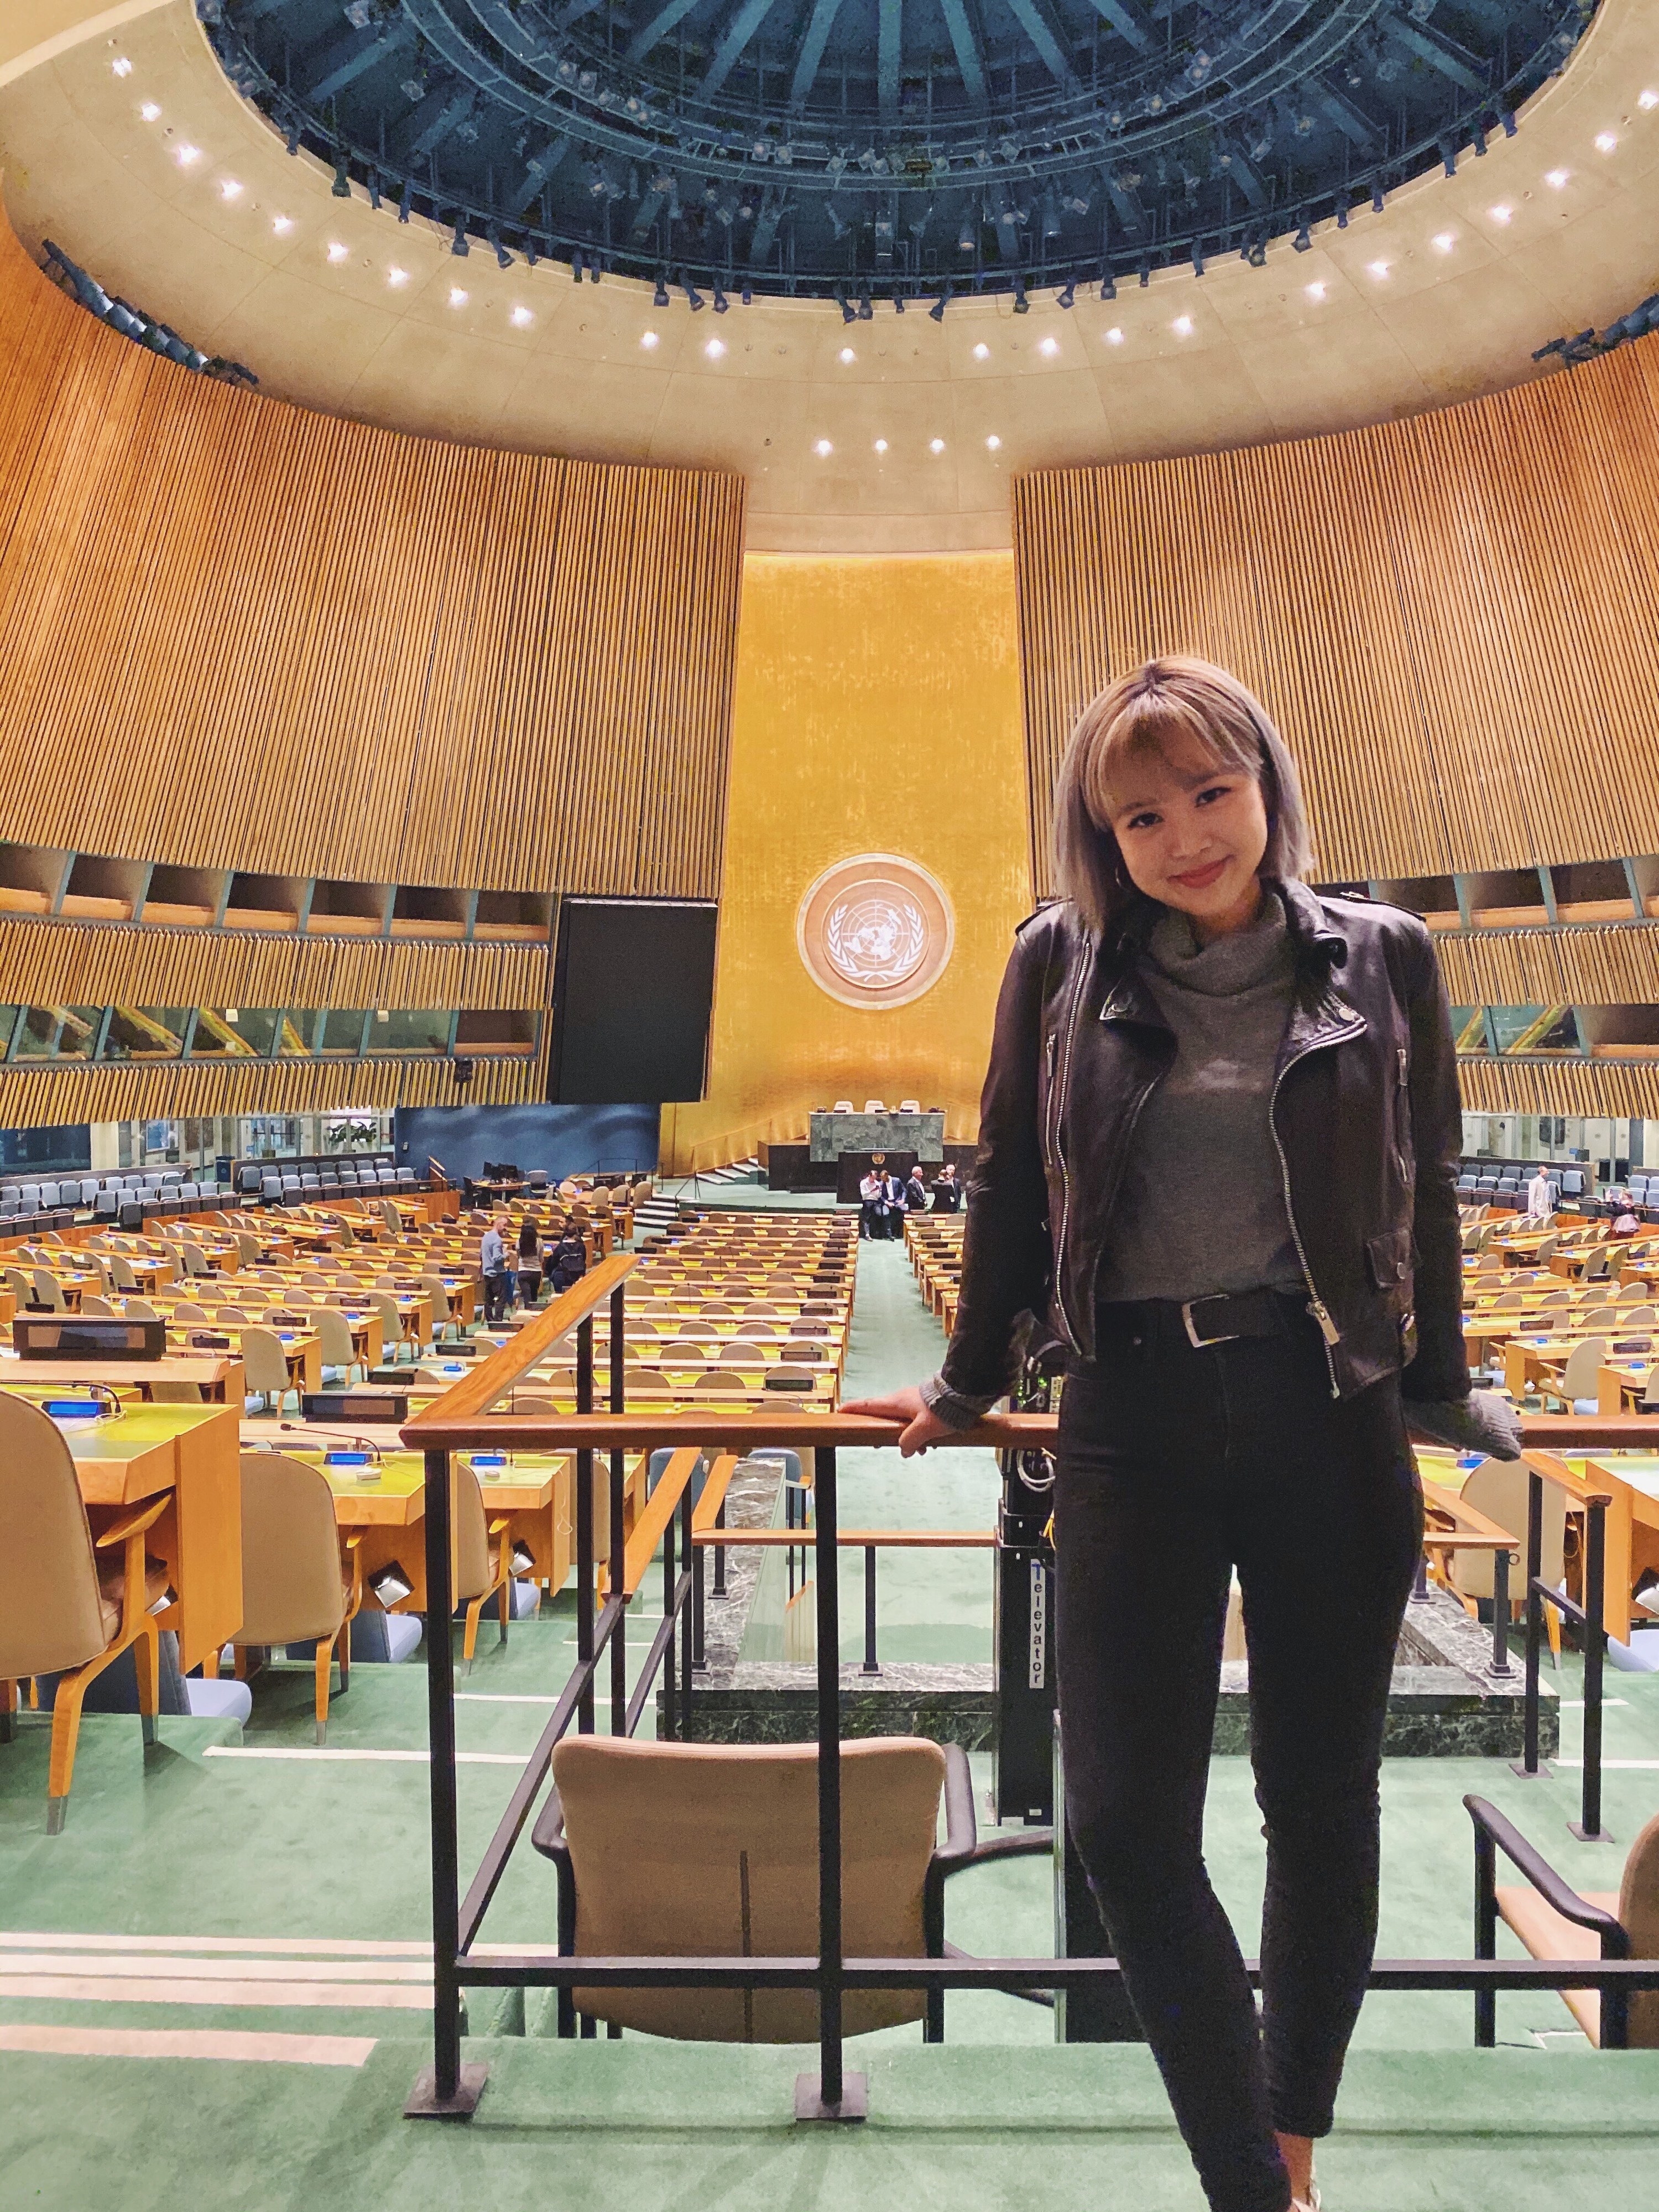 Judy while working for the United Nations